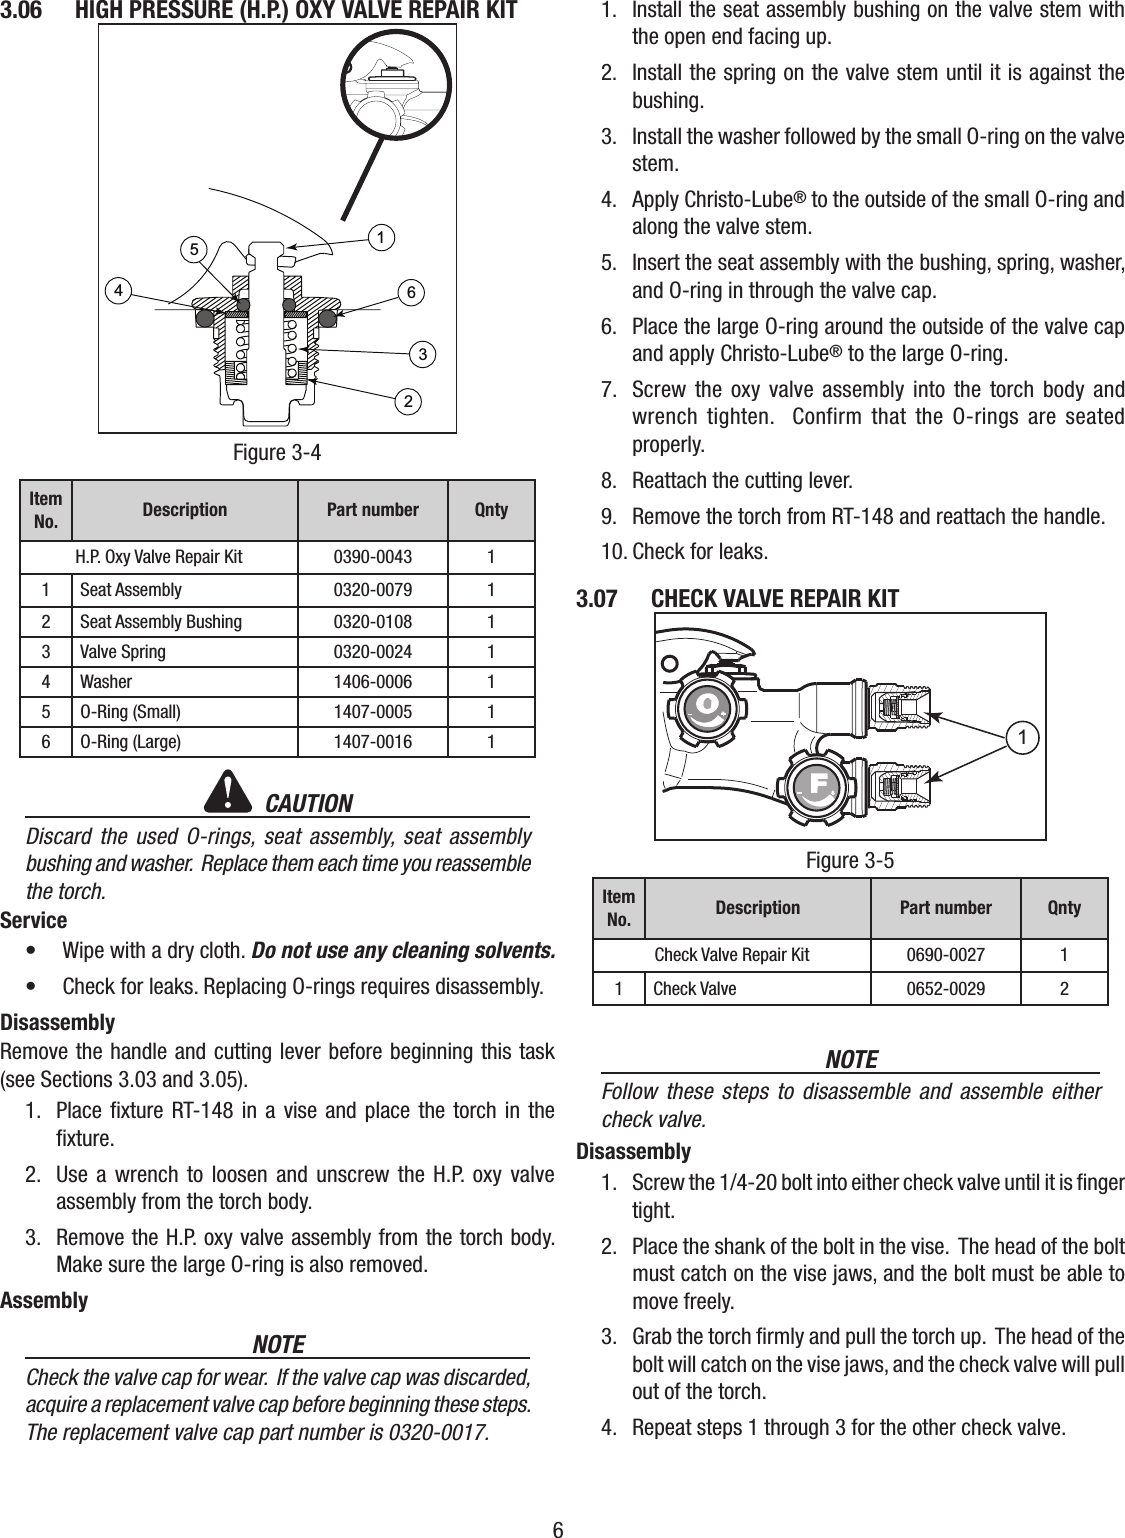 Page 6 of 12 - Victor-ST411C-1A-Acetylene-Torch-Manual